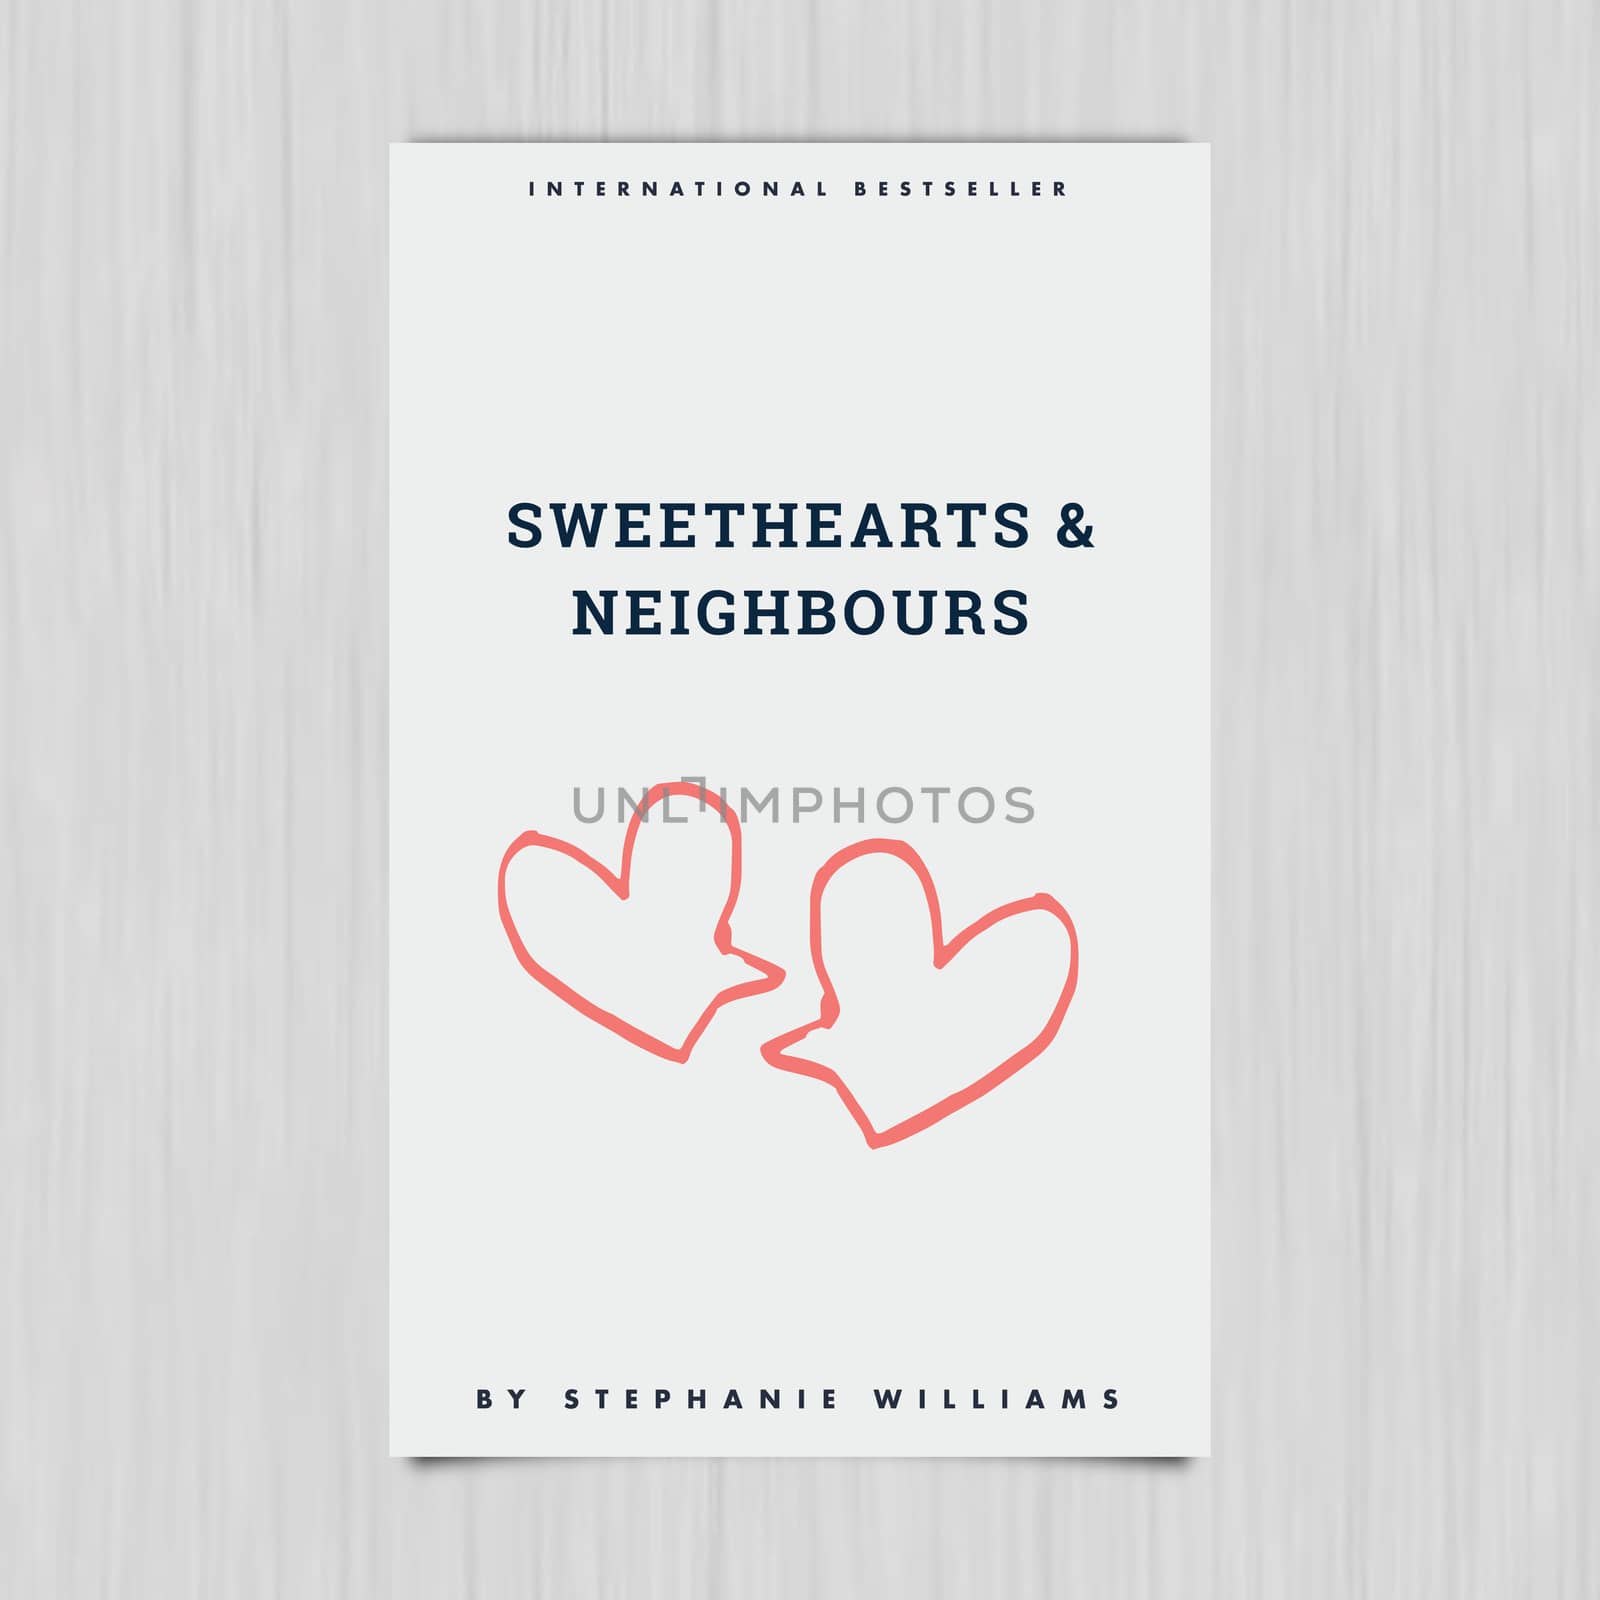 Vector of novel cover with sweethearts and neighbours text against grey background